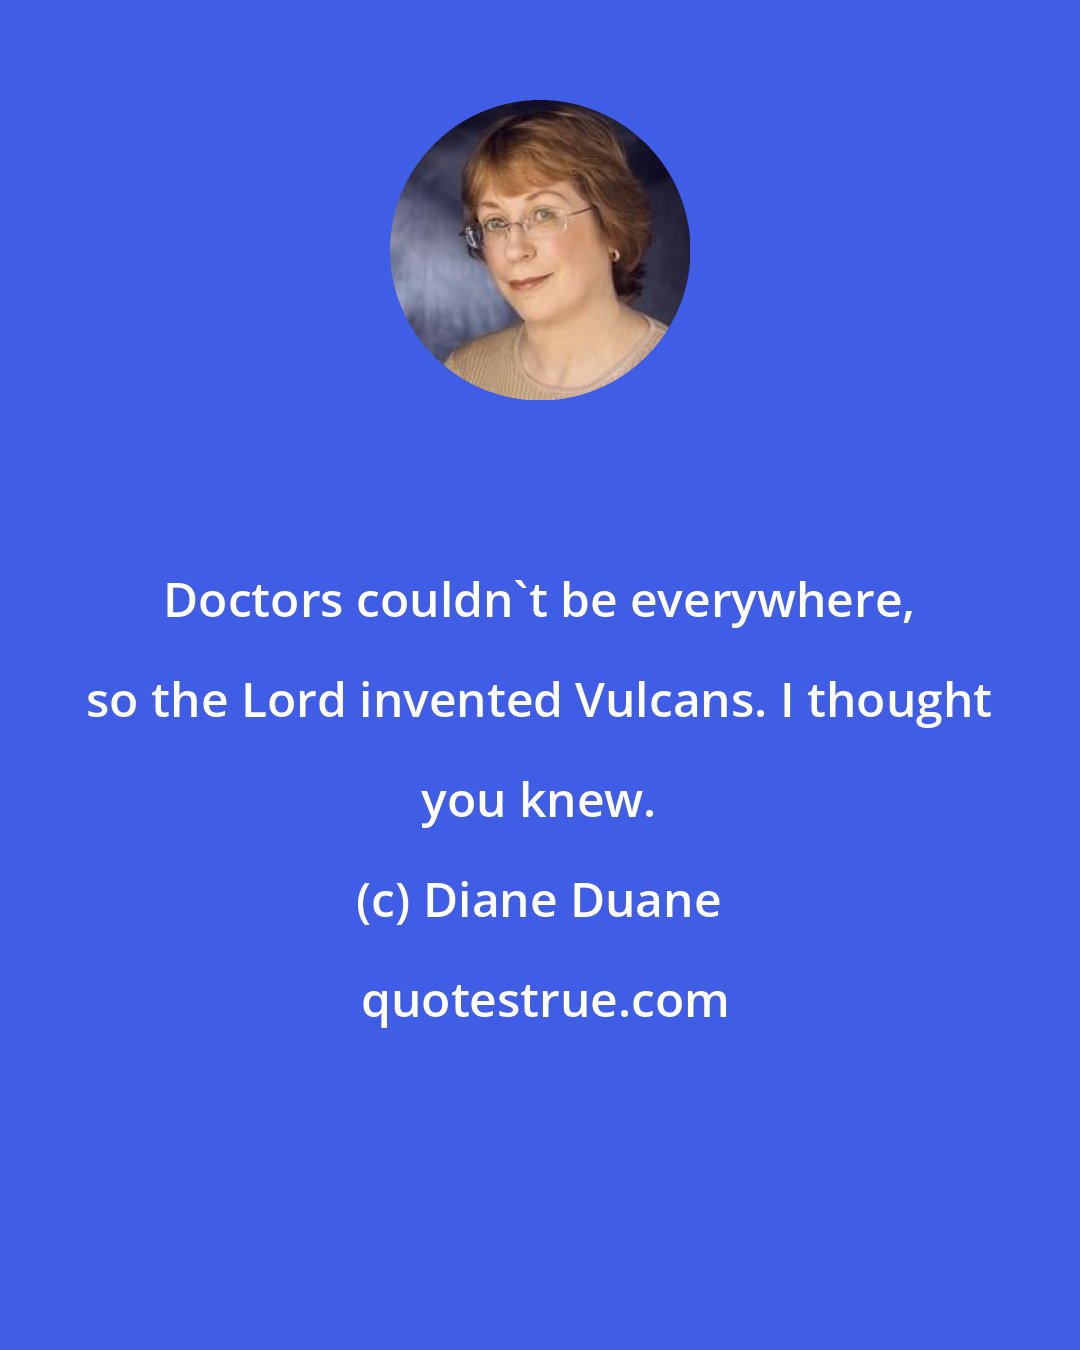 Diane Duane: Doctors couldn't be everywhere, so the Lord invented Vulcans. I thought you knew.